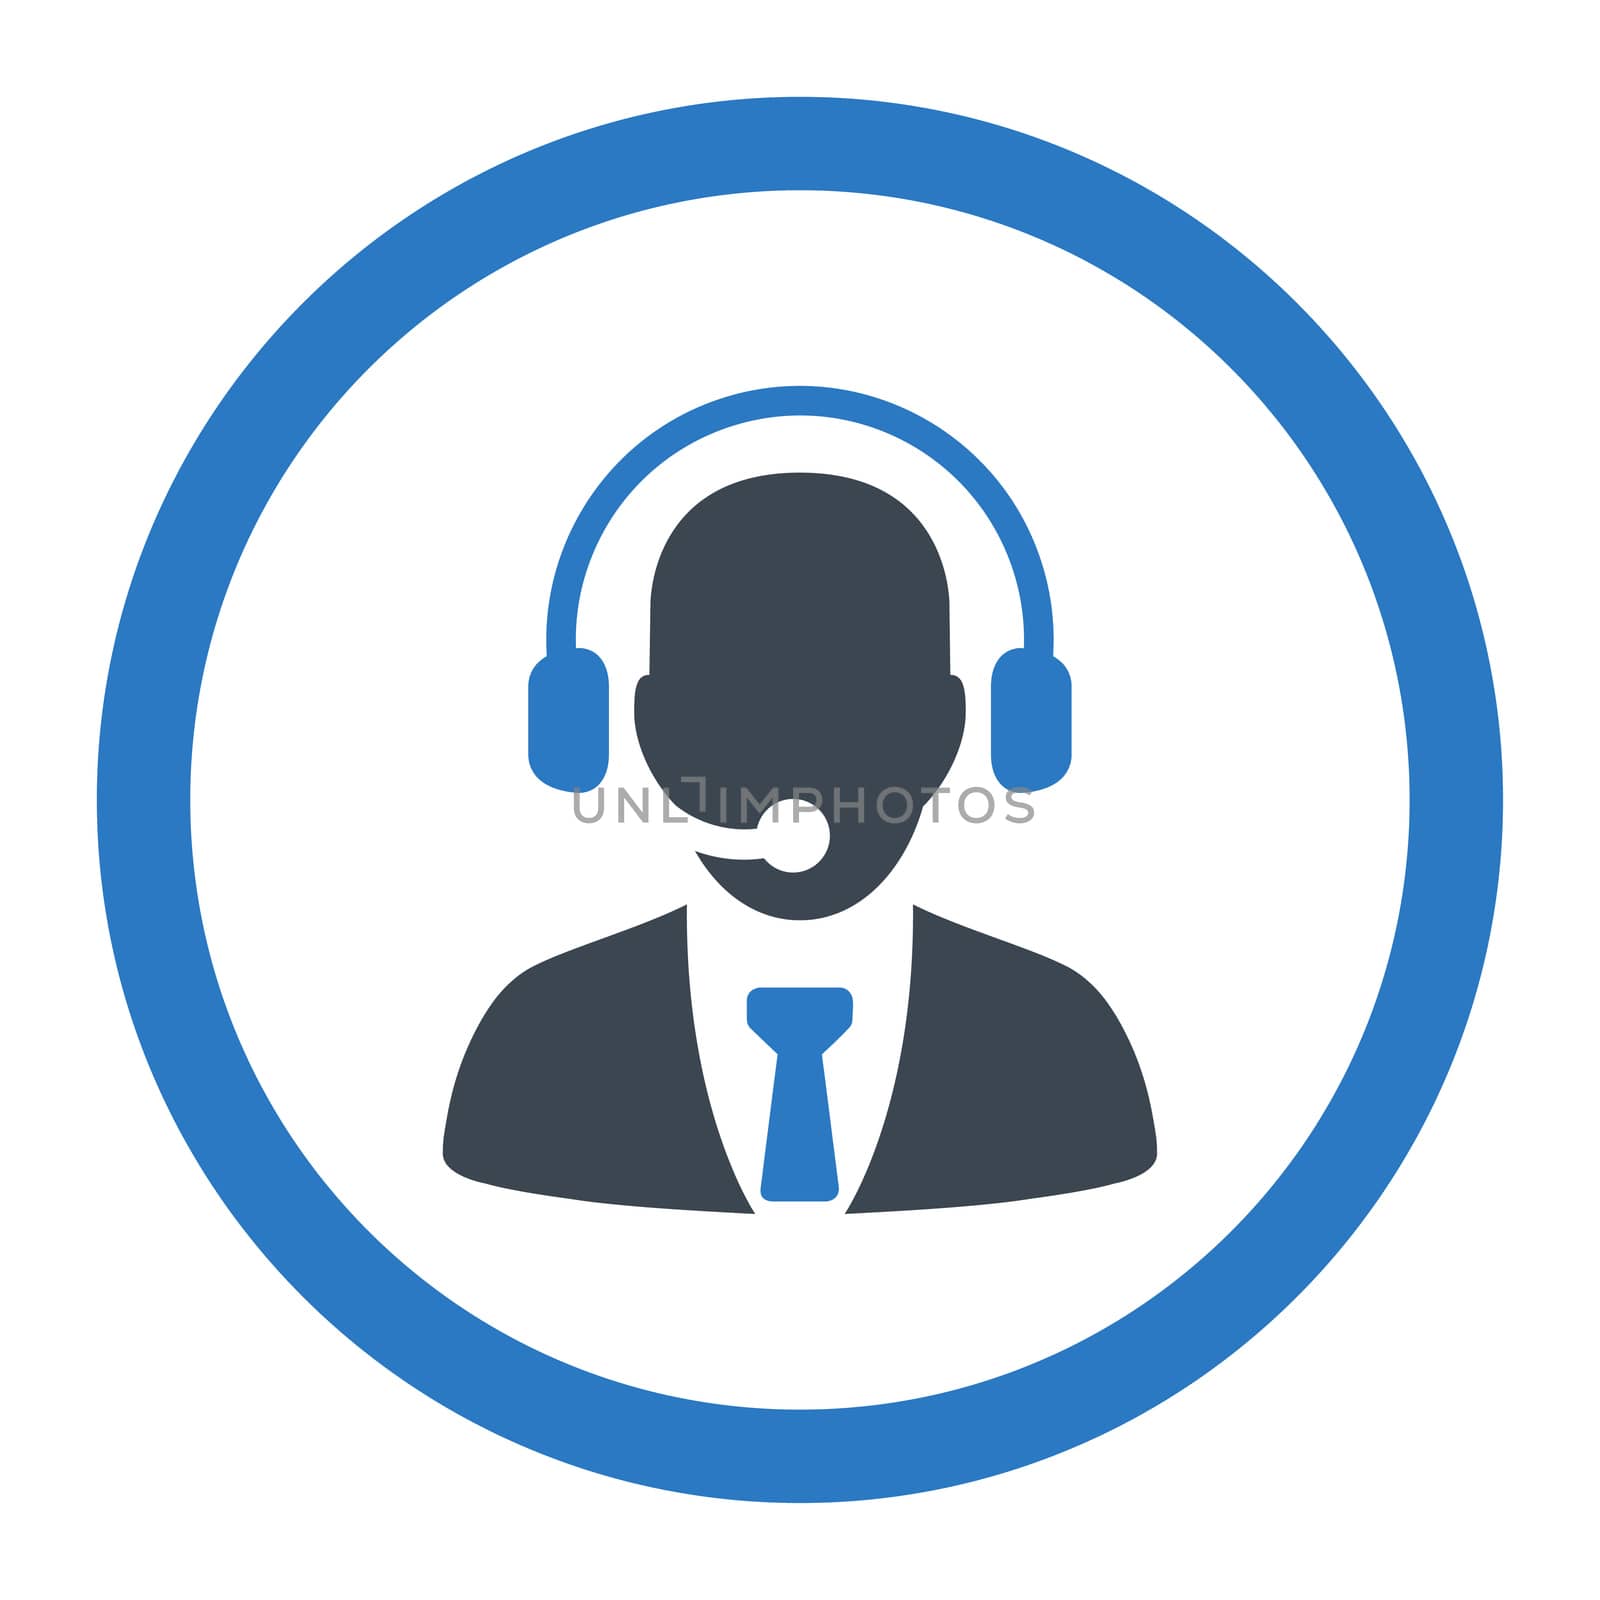 Call center glyph icon. This rounded flat symbol is drawn with smooth blue colors on a white background.